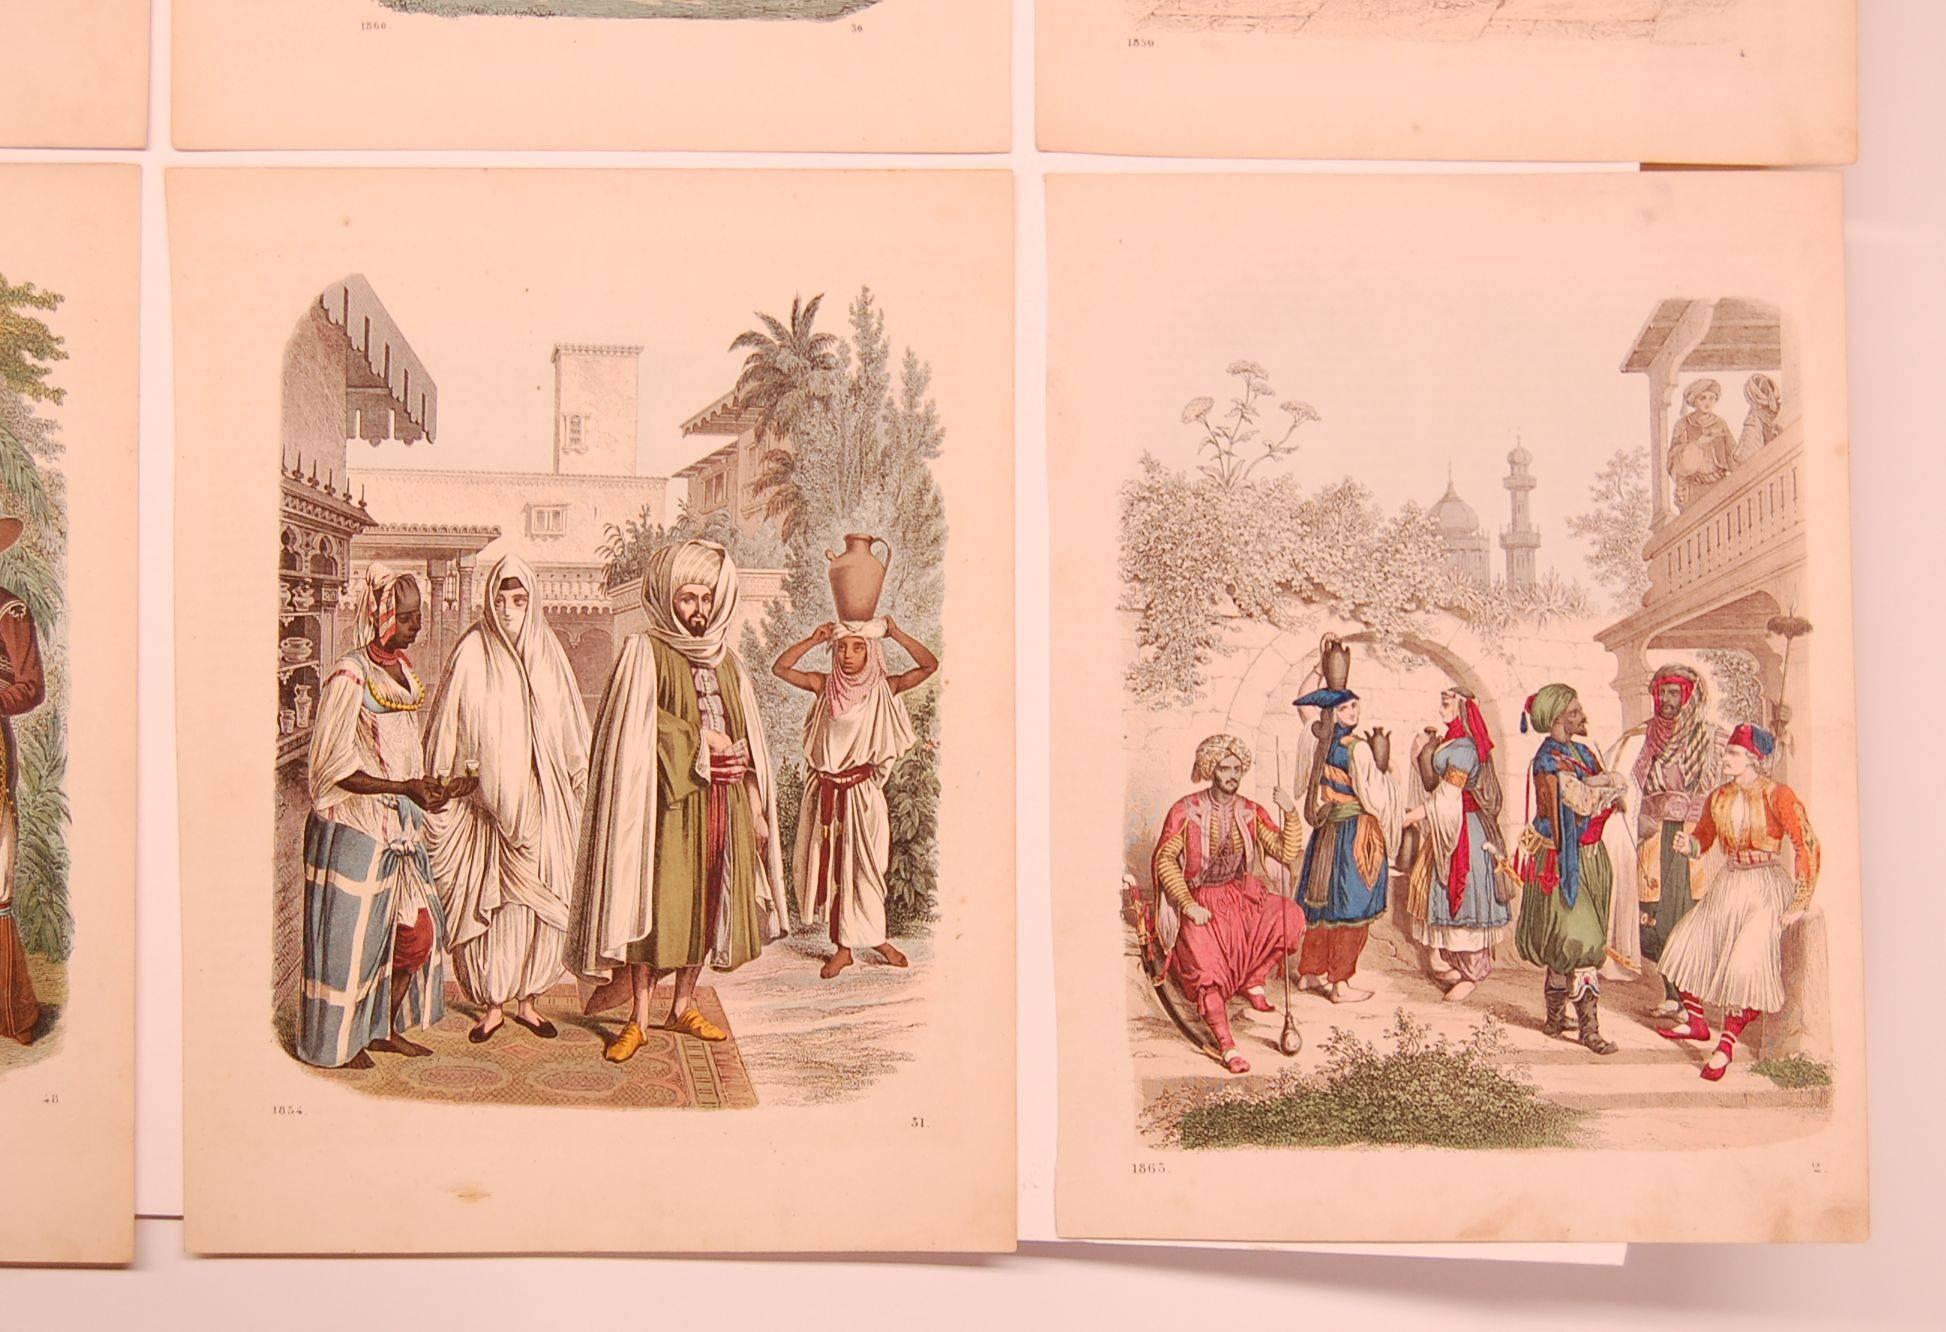 Eight extremely nice hand-colored prints dating 1853-1863, all very similar in coloring and style.